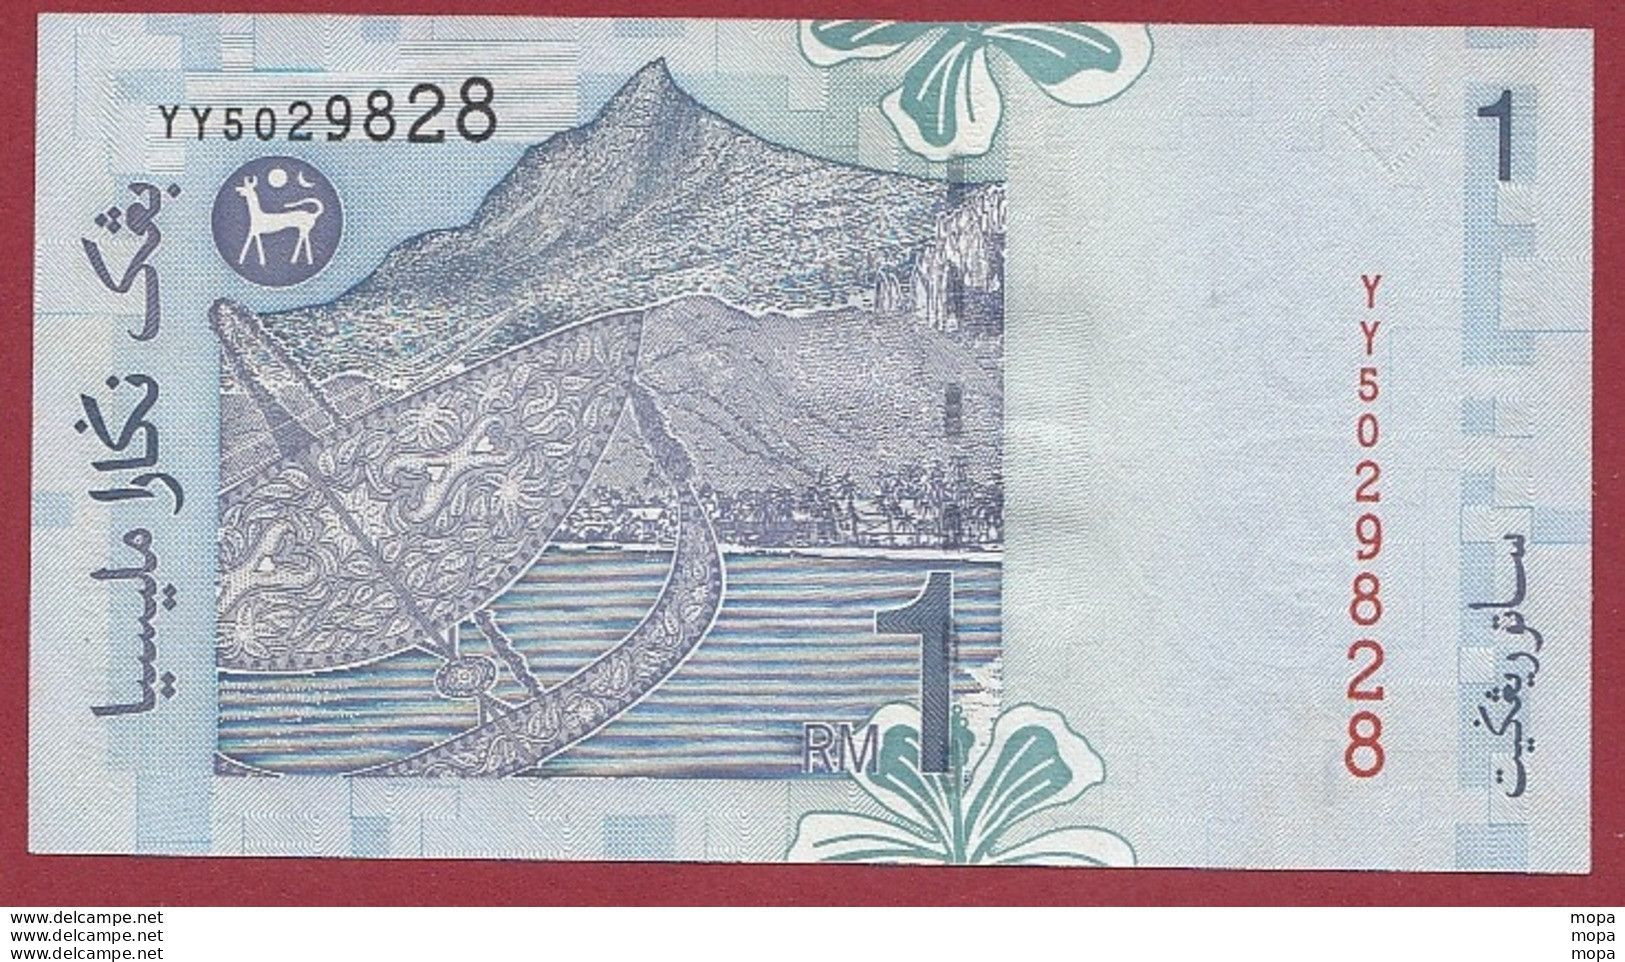 Malaysie 1 Ringgit 1998 ---UNC---(263) - Malaysie